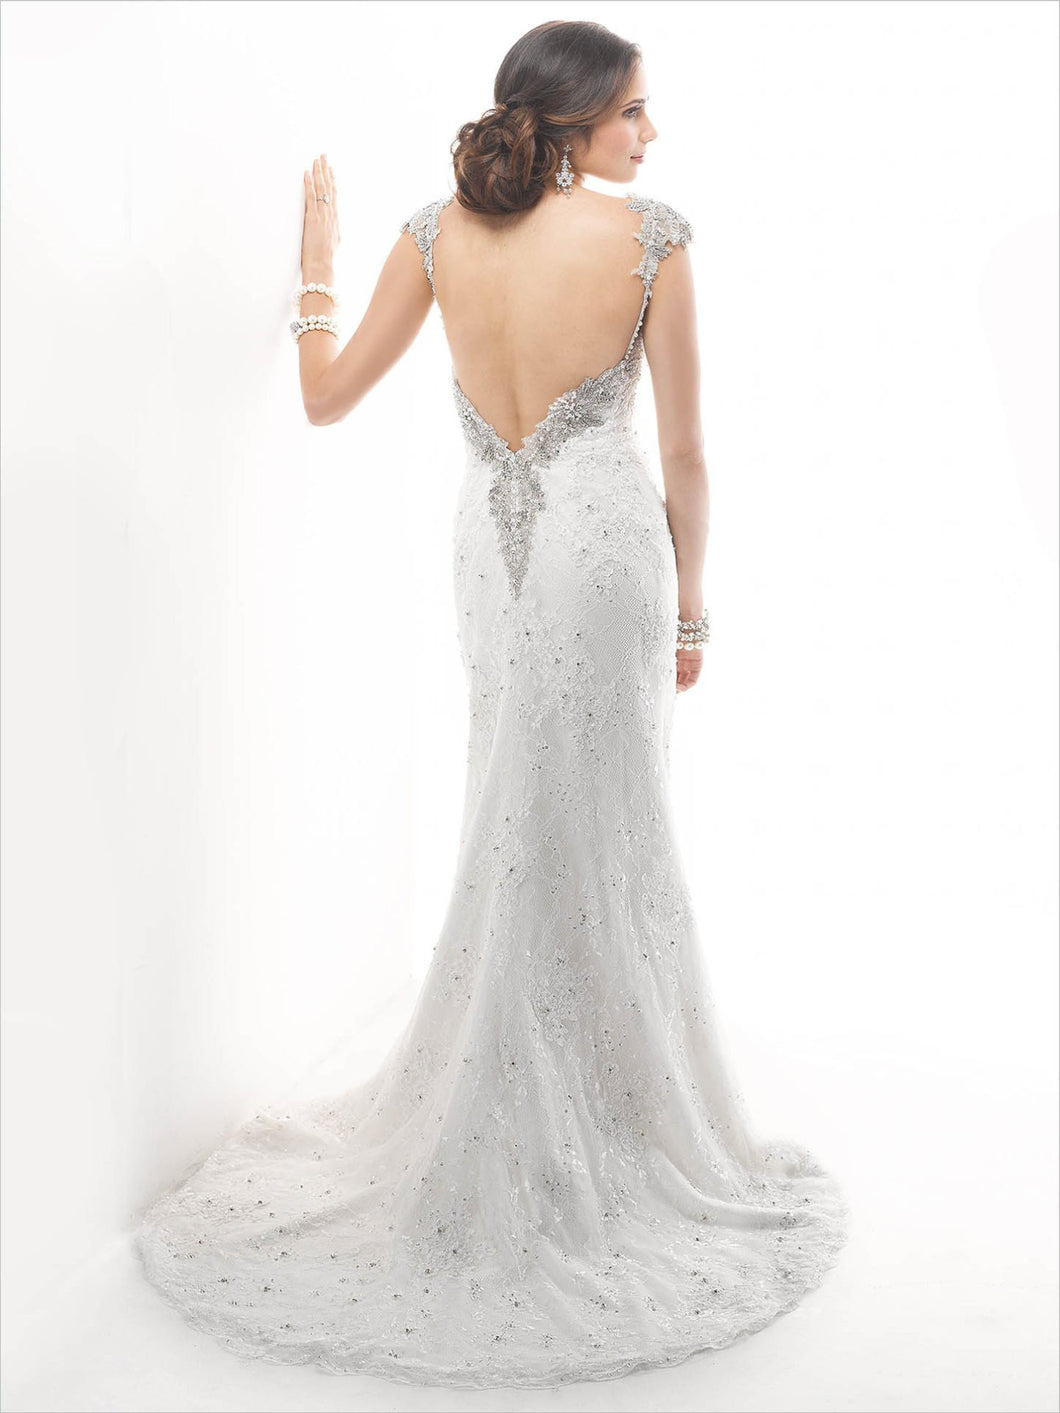 Maggie Sottero 'Brandy' - Maggie Sottero - Nearly Newlywed Bridal Boutique